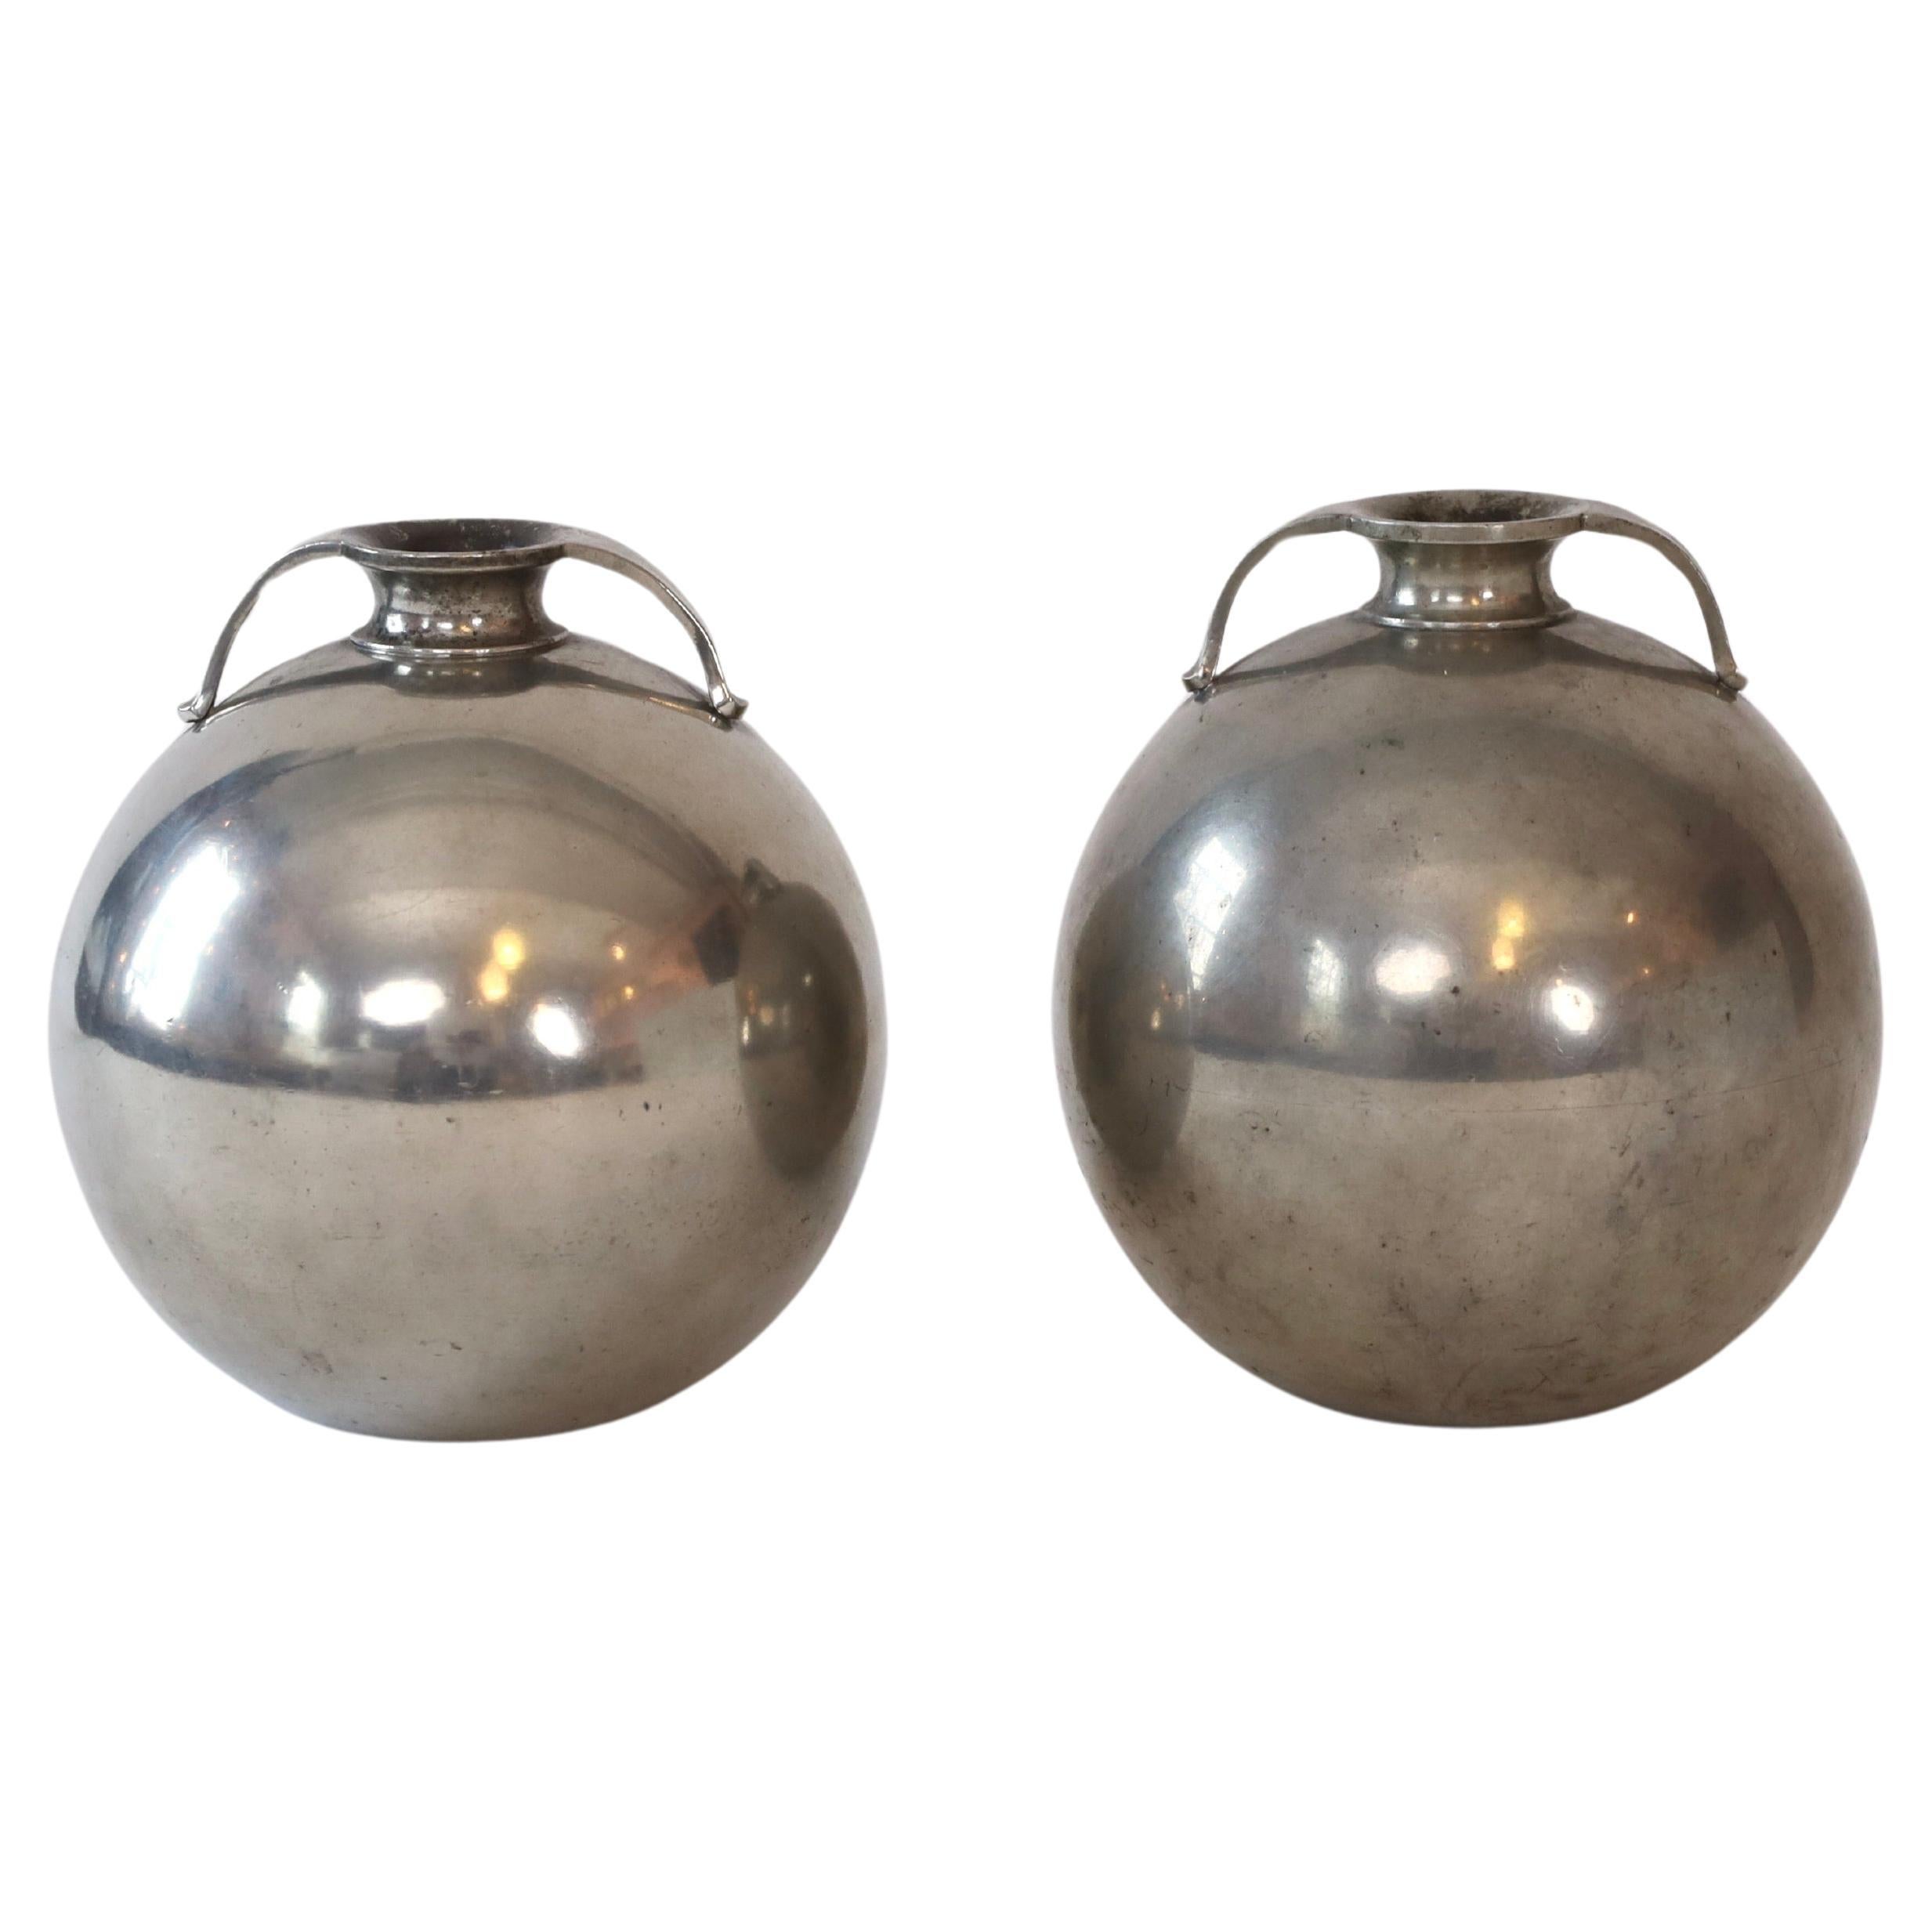 Set of round Pewter vases by Just Andersen, 1930s, Denmark